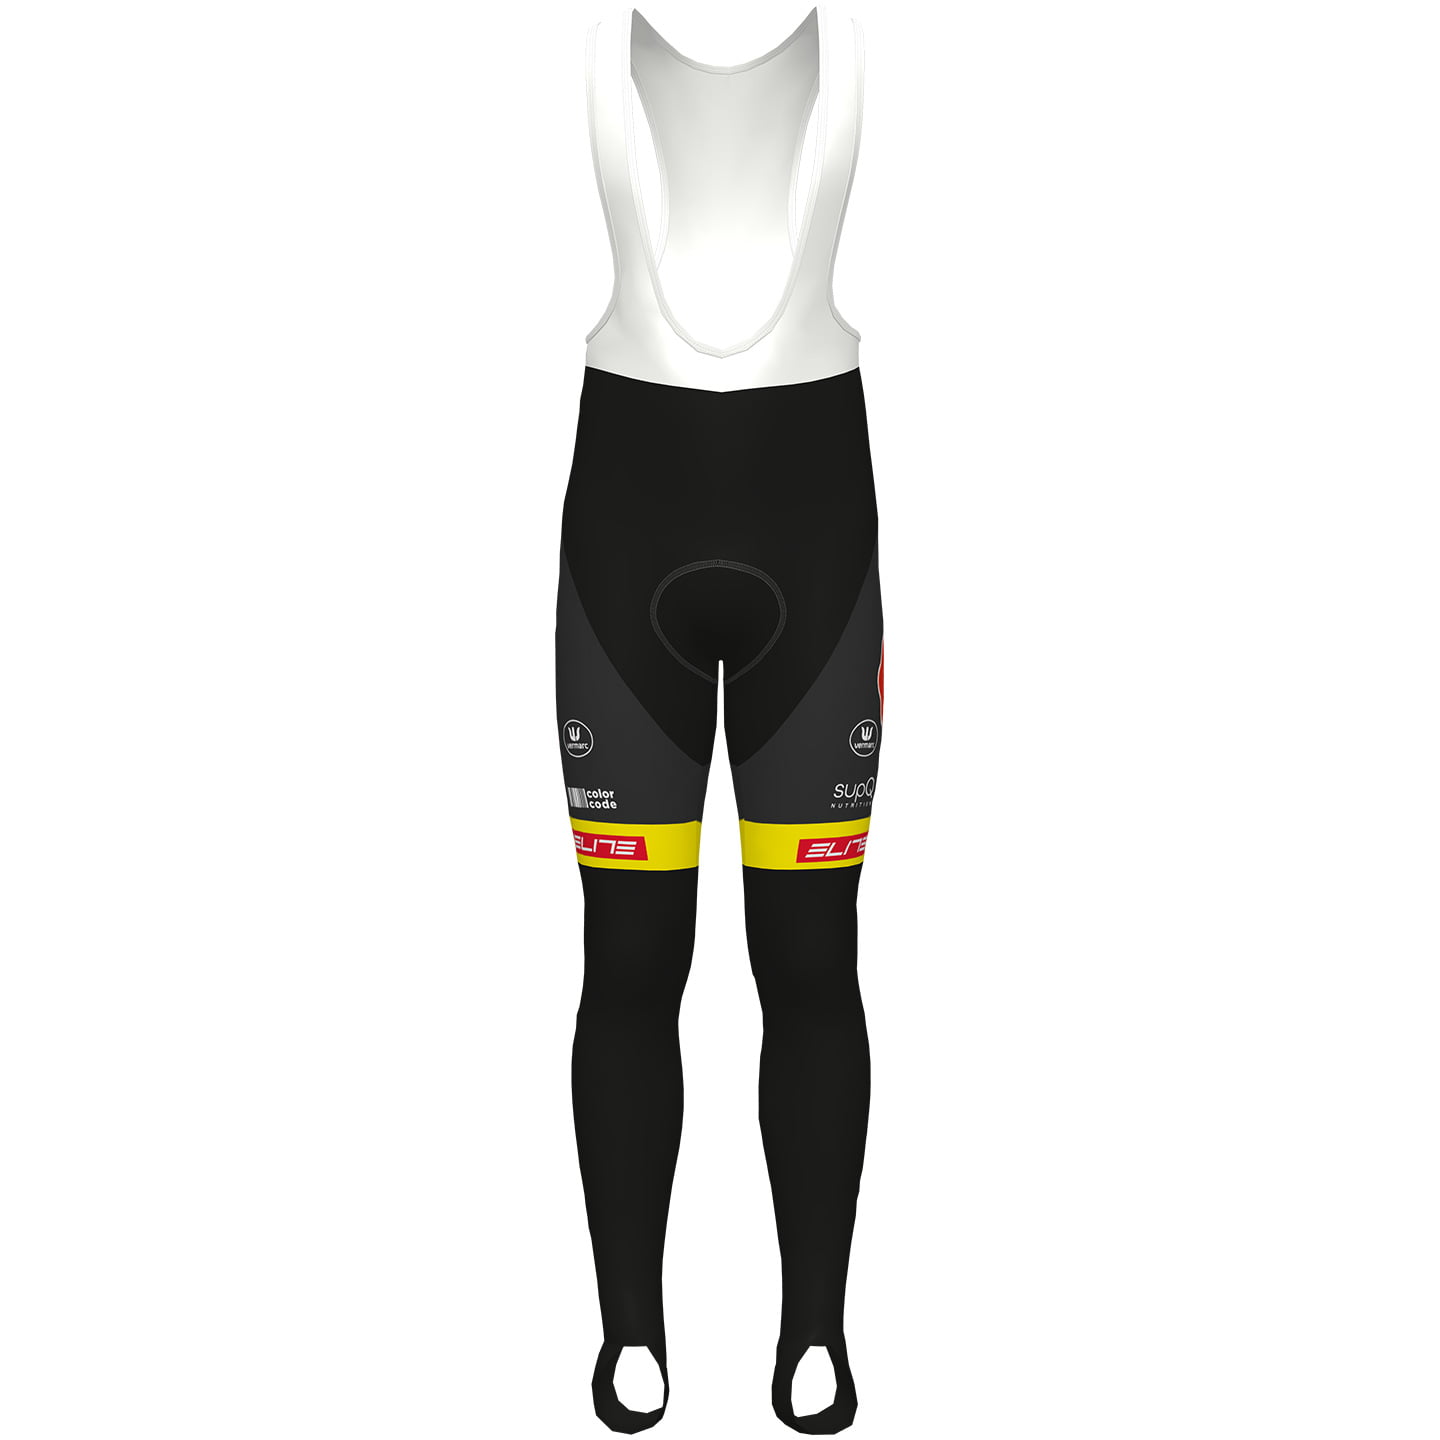 BINGOAL PAUWELS SAUCES WB 2022 Bib Tights, for men, size S, Cycle tights, Cycling clothing